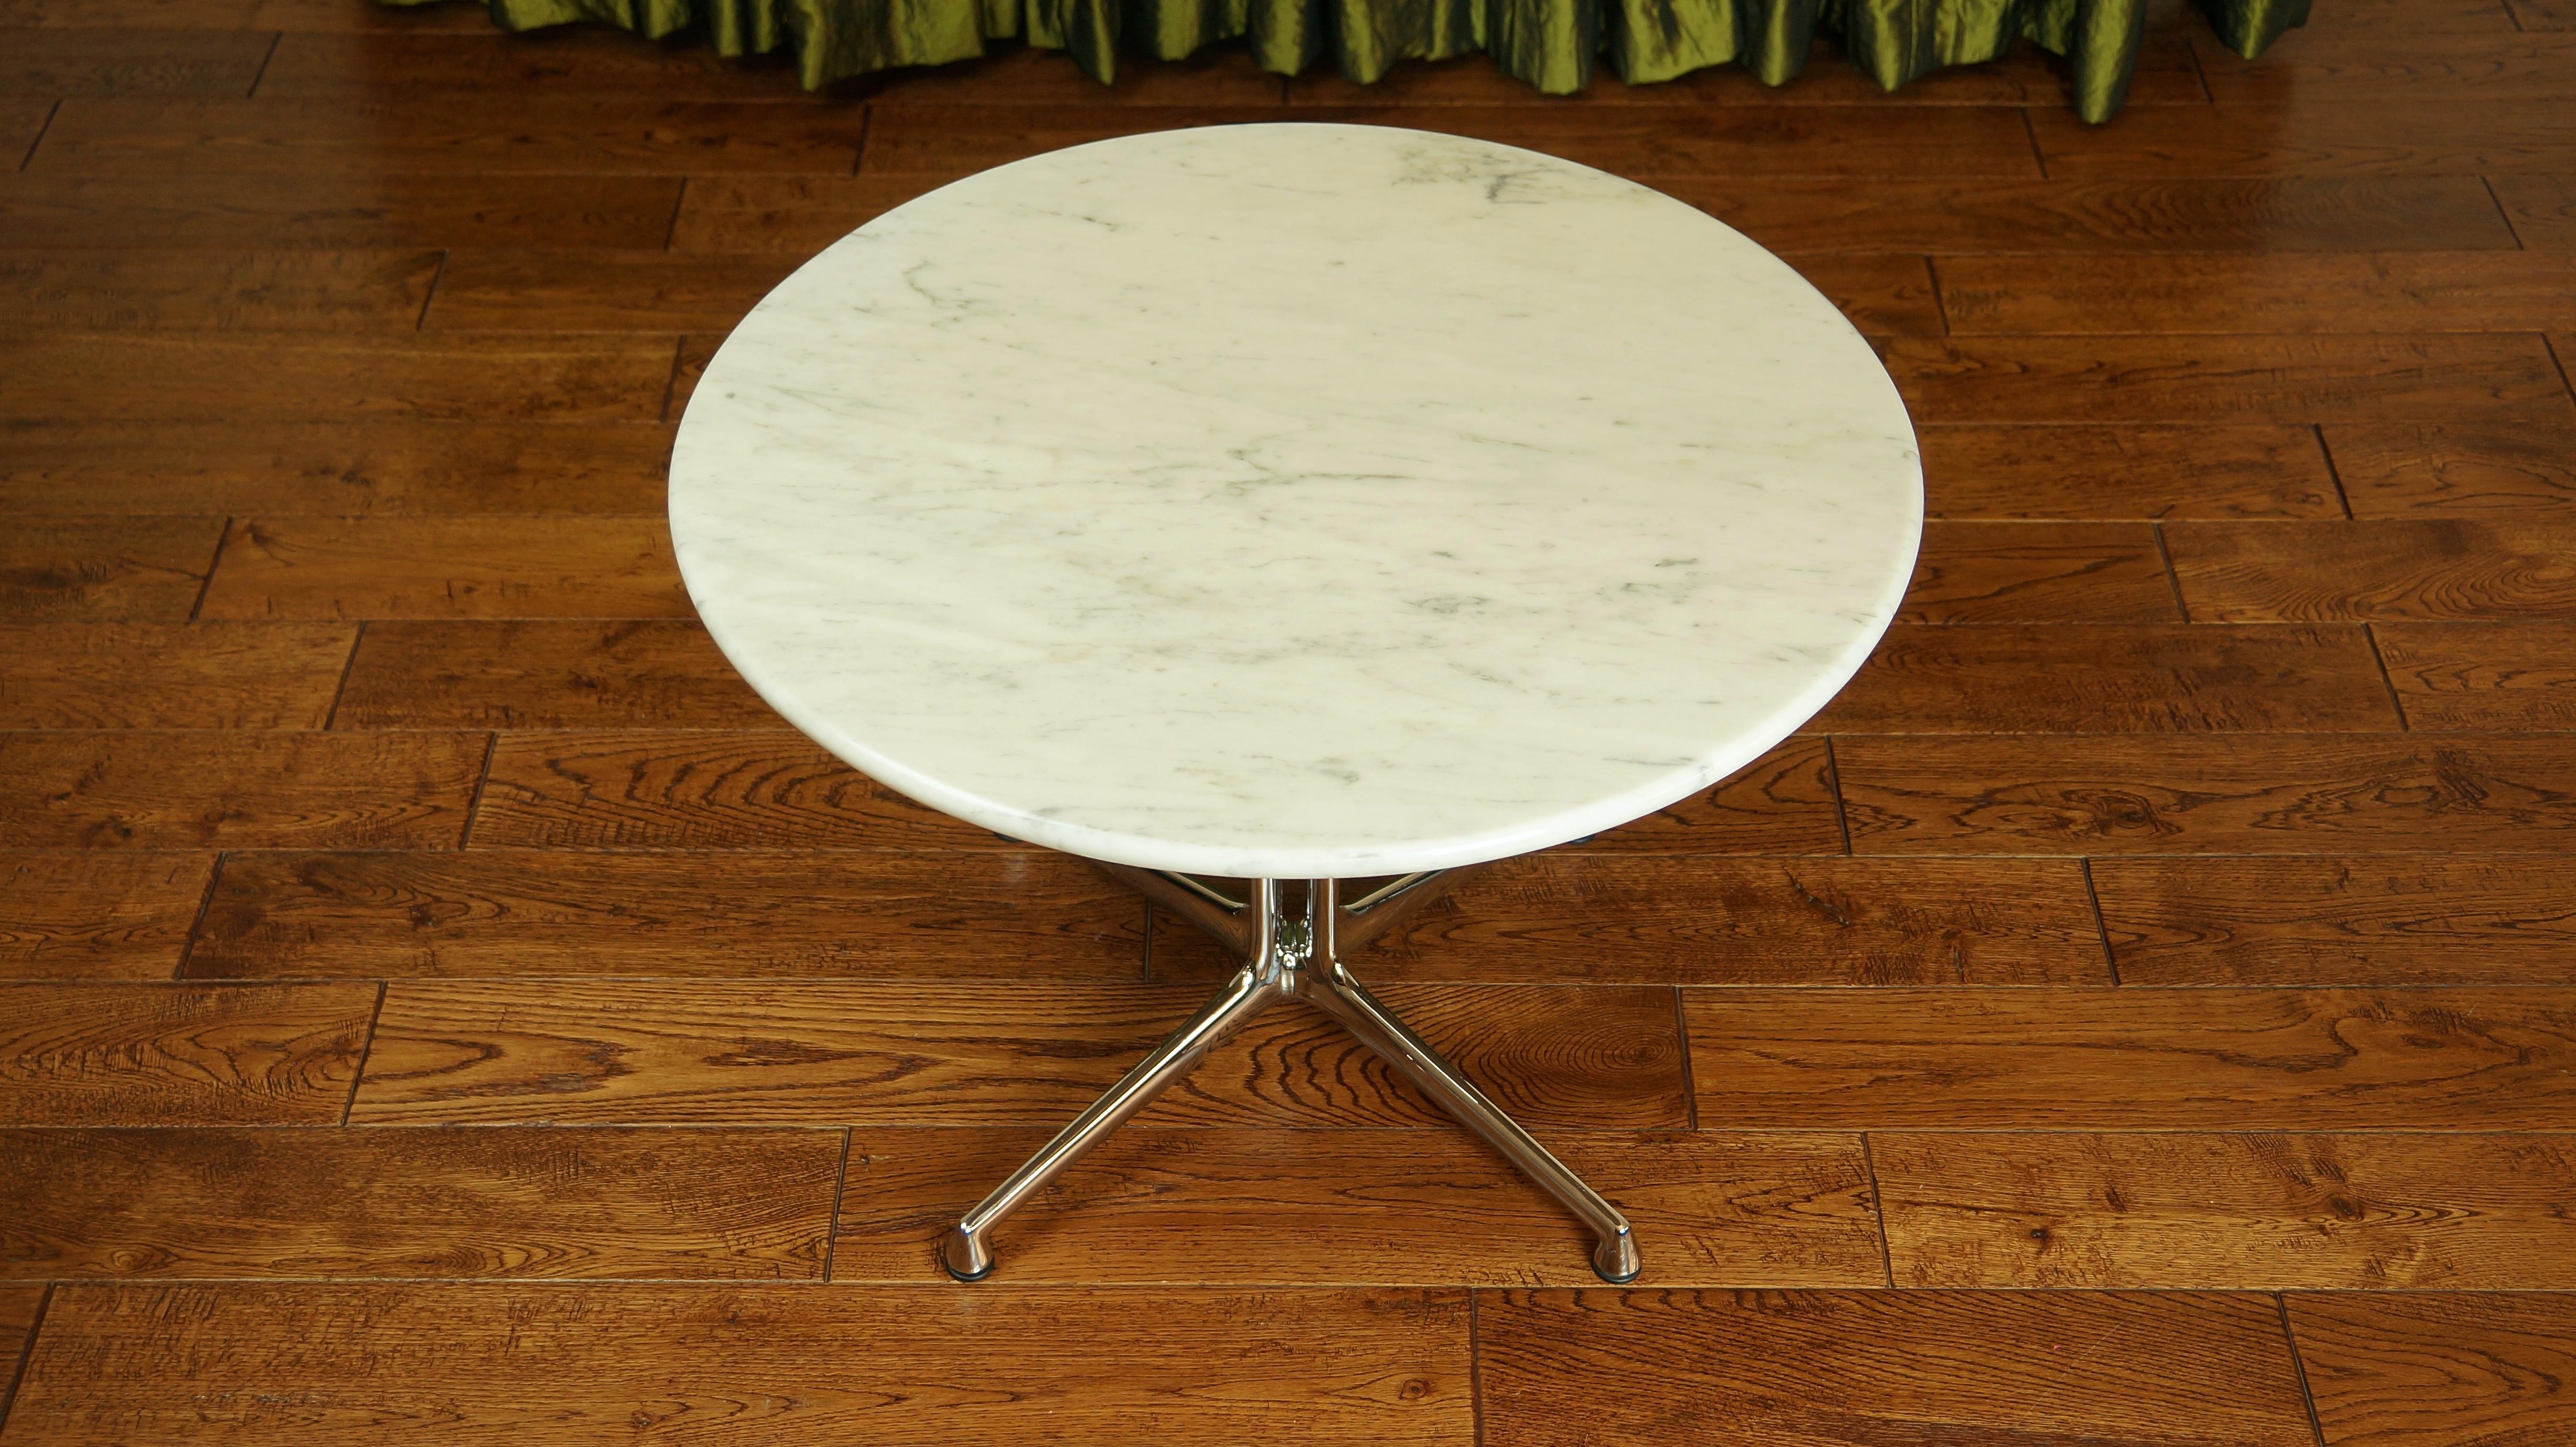 La Fonda marble coffee table or side table 
Designed by Charles Eames
Produced by Herman Miller, USA
Vintage 1960s.

A Classic design with quality materials in excellent clean vintage condition throughout.
Genuine 20mm thick marble, not